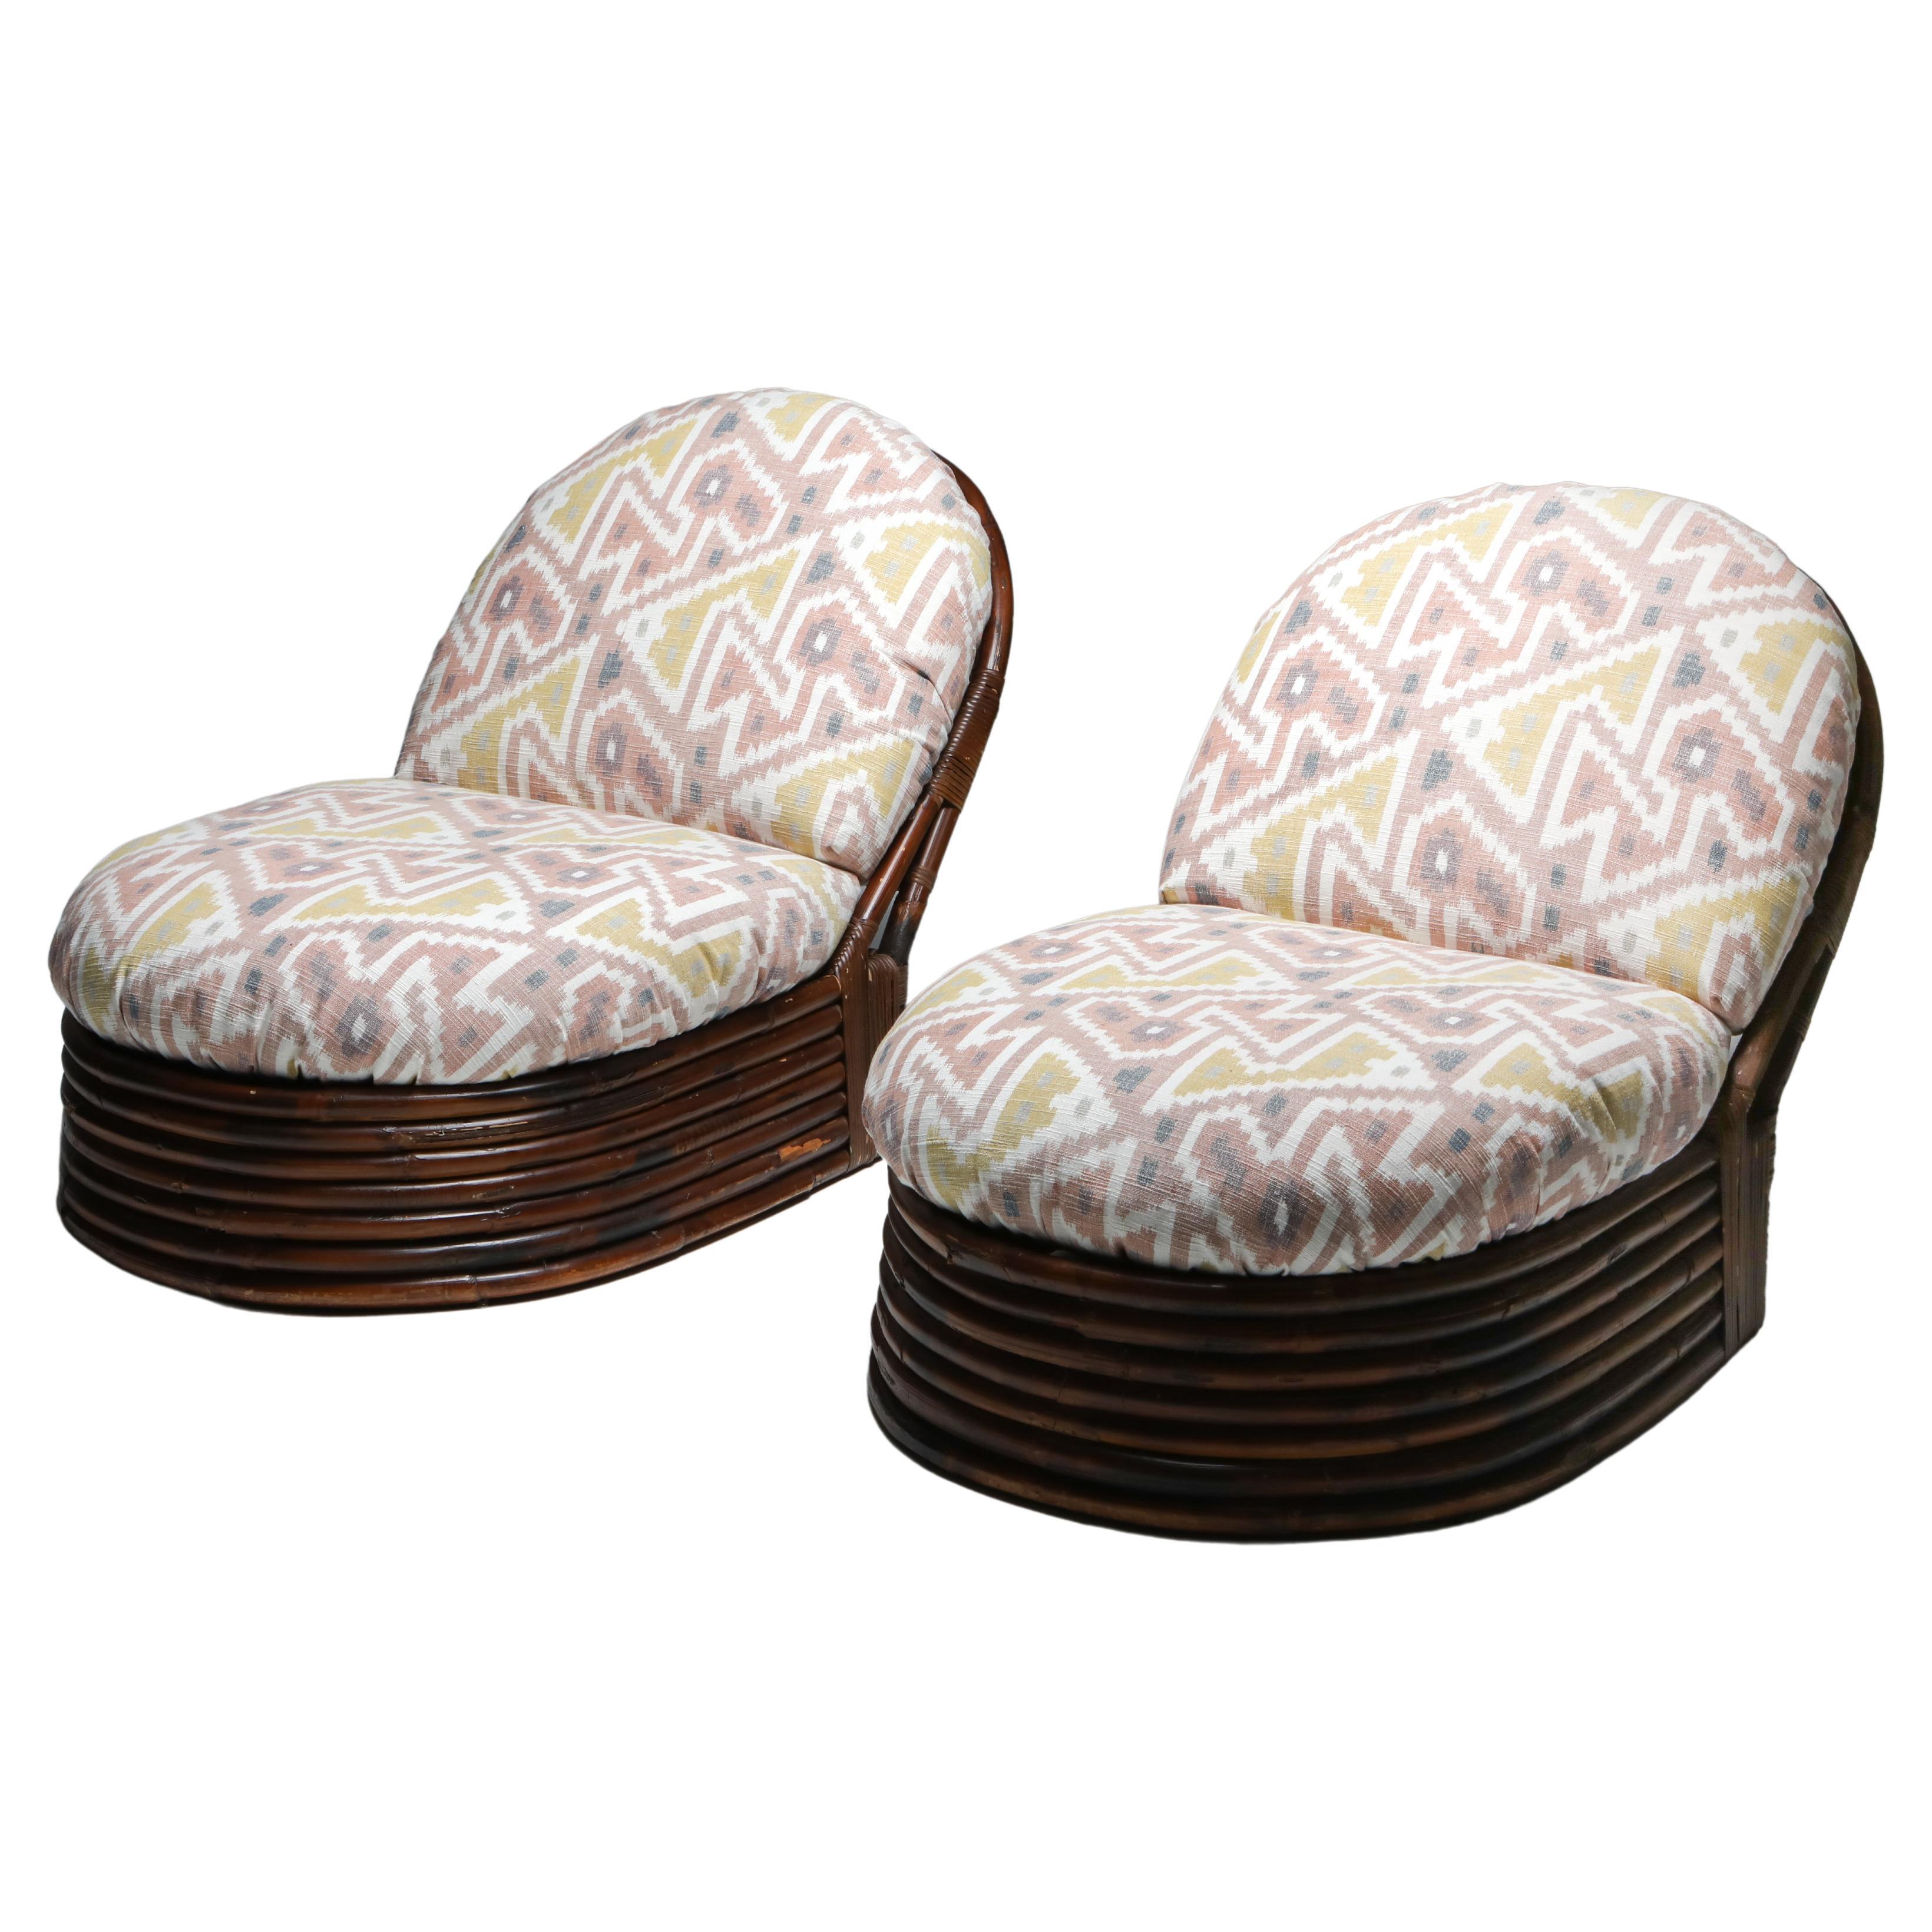 Vivai Del Sud Bamboo Lounge Chairs, Pierre Frey Jacquard, 1970s For Sale